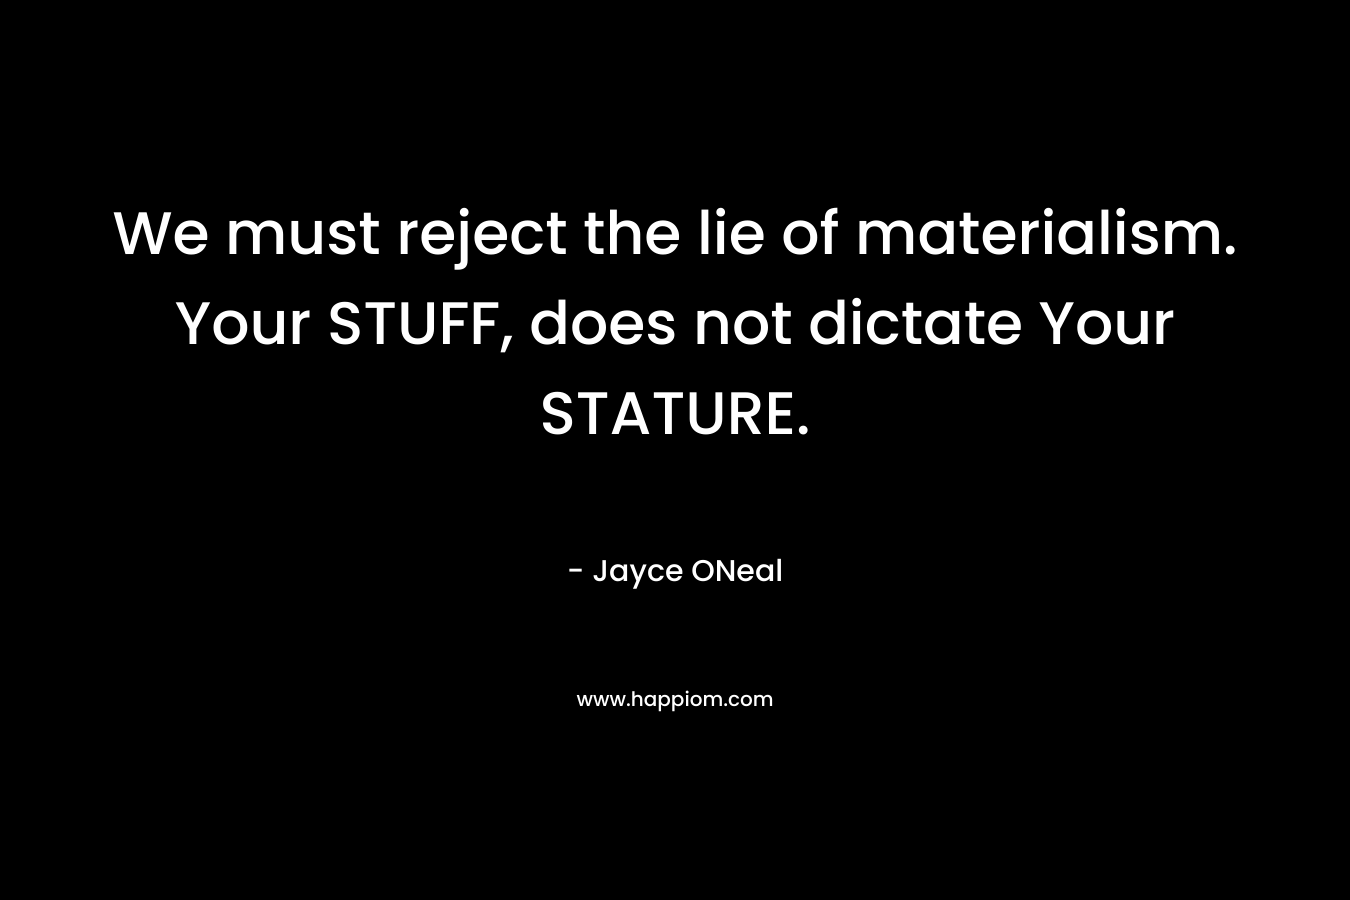 We must reject the lie of materialism. Your STUFF, does not dictate Your STATURE.